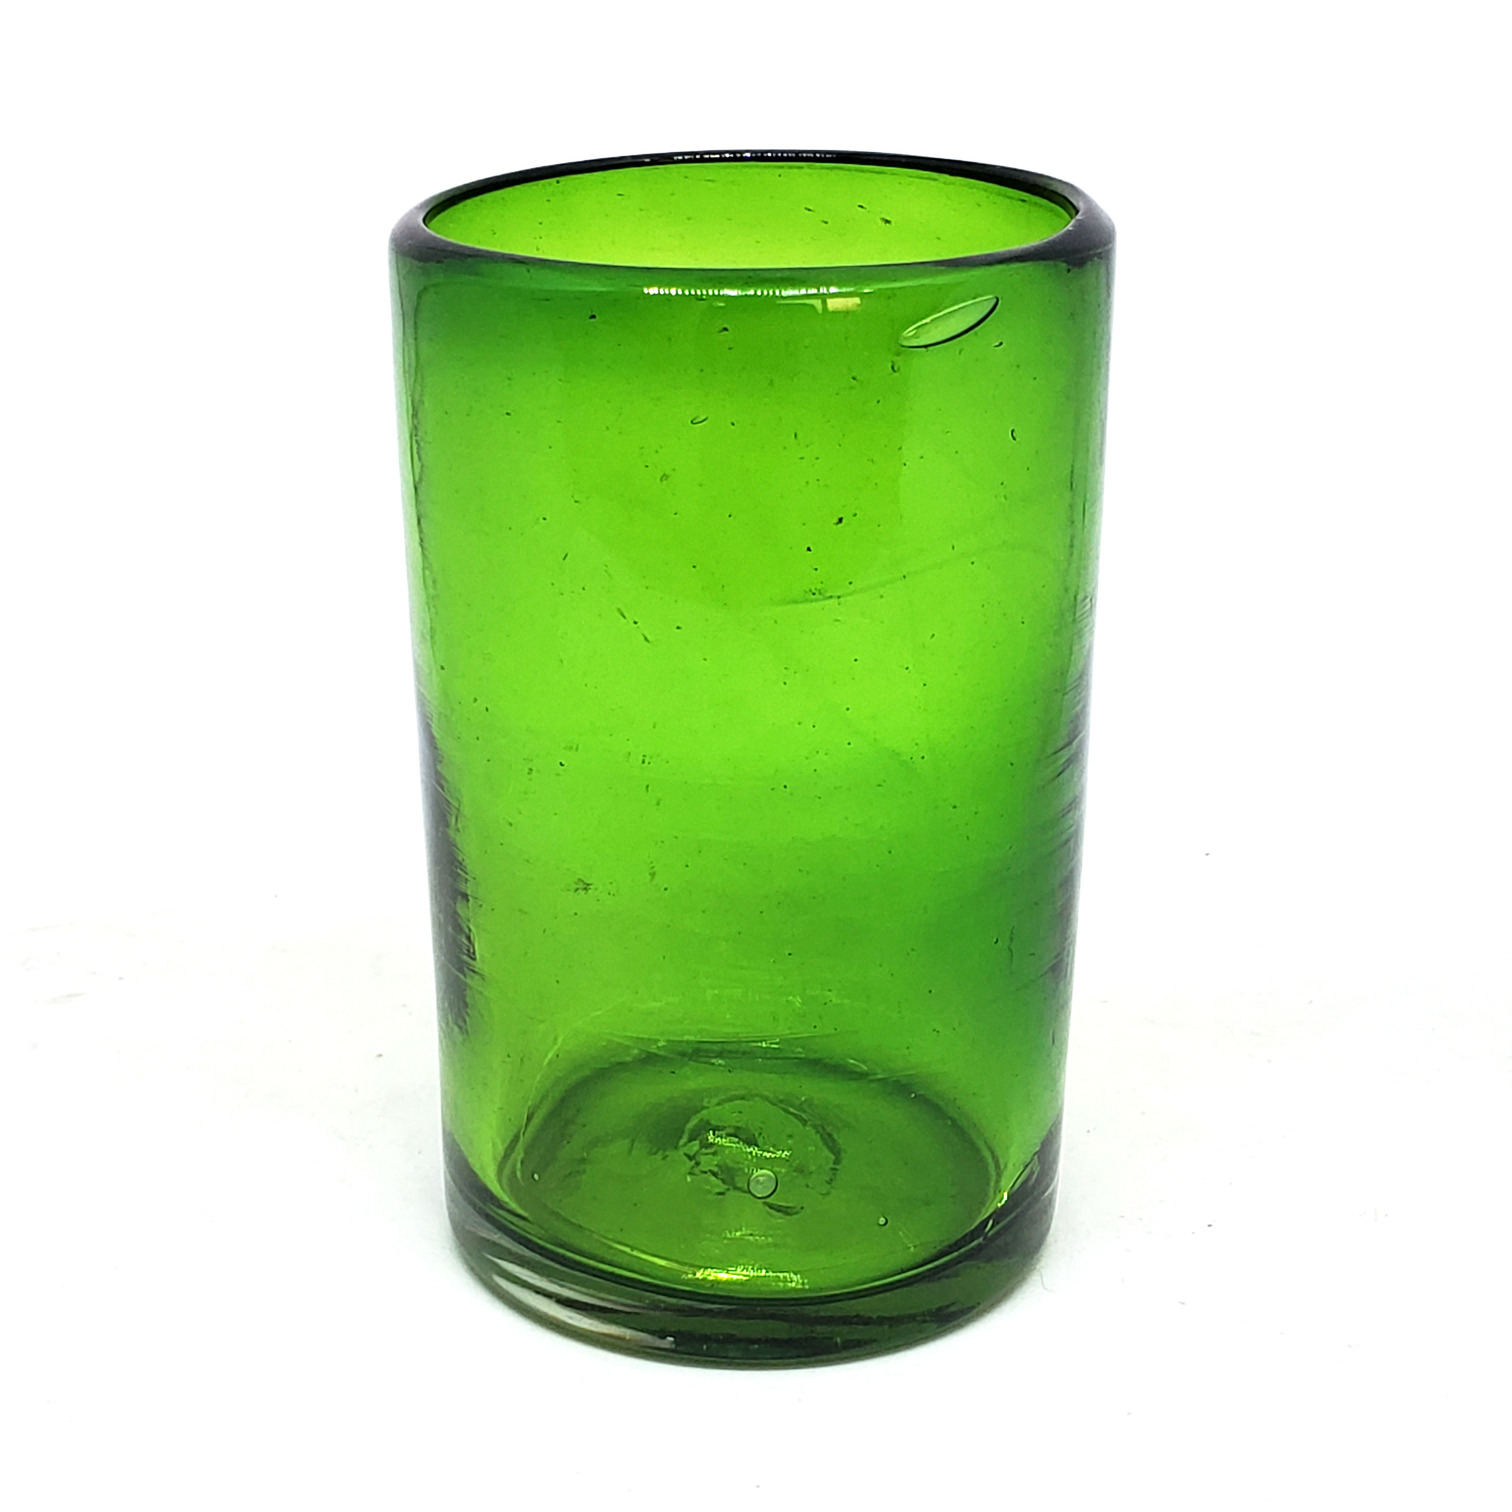 Sale Items / Solid Emerald Green 14 oz Drinking Glasses (set of 6) / These handcrafted glasses deliver a classic touch to your favorite drink.